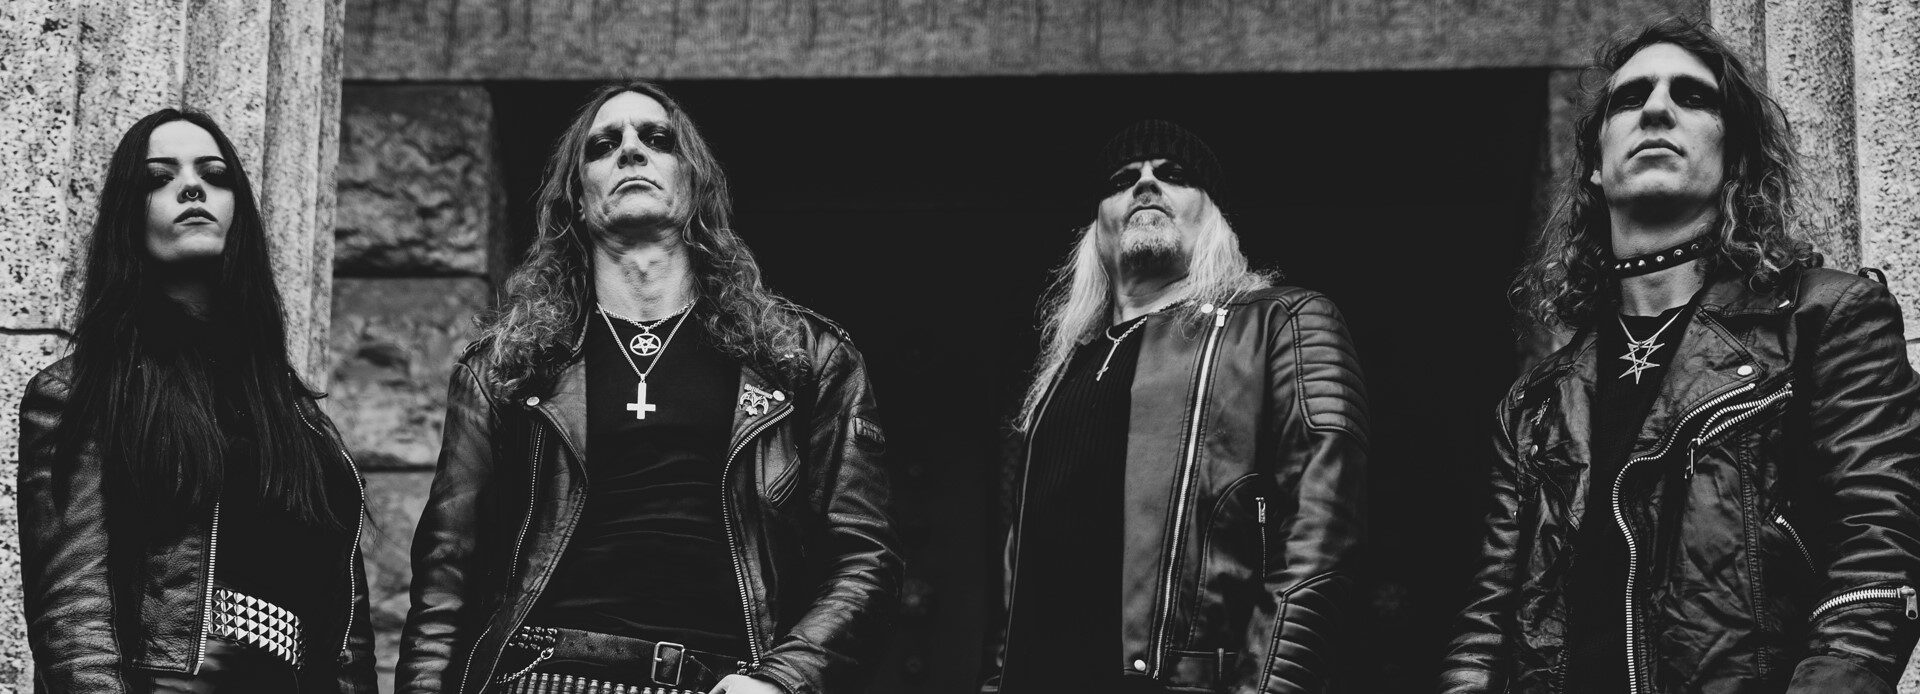 Triumph Of Death Plays Hellhammer in Australia